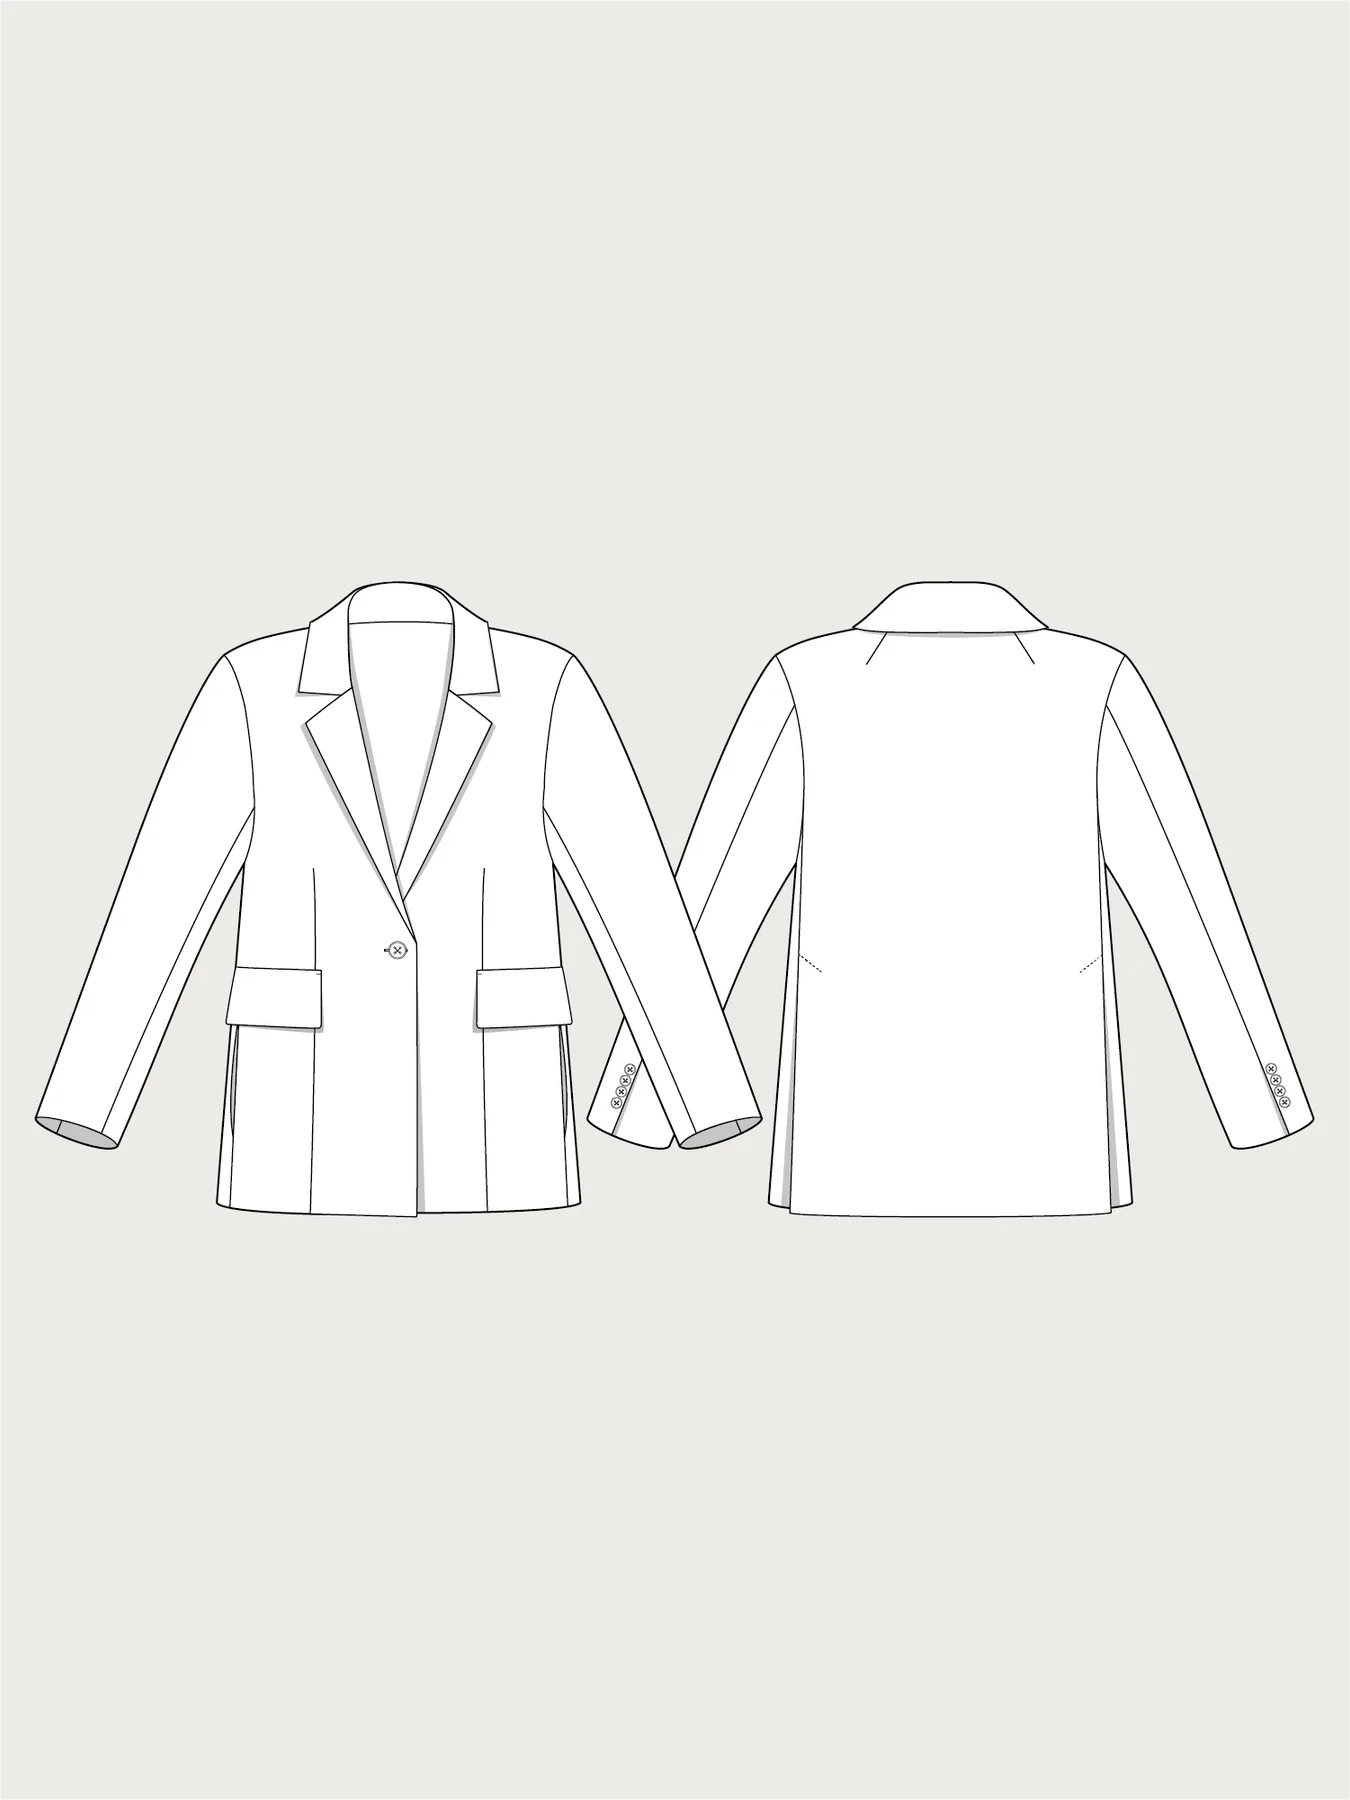 Blazer - Sewing Pattern | The Assembly Line